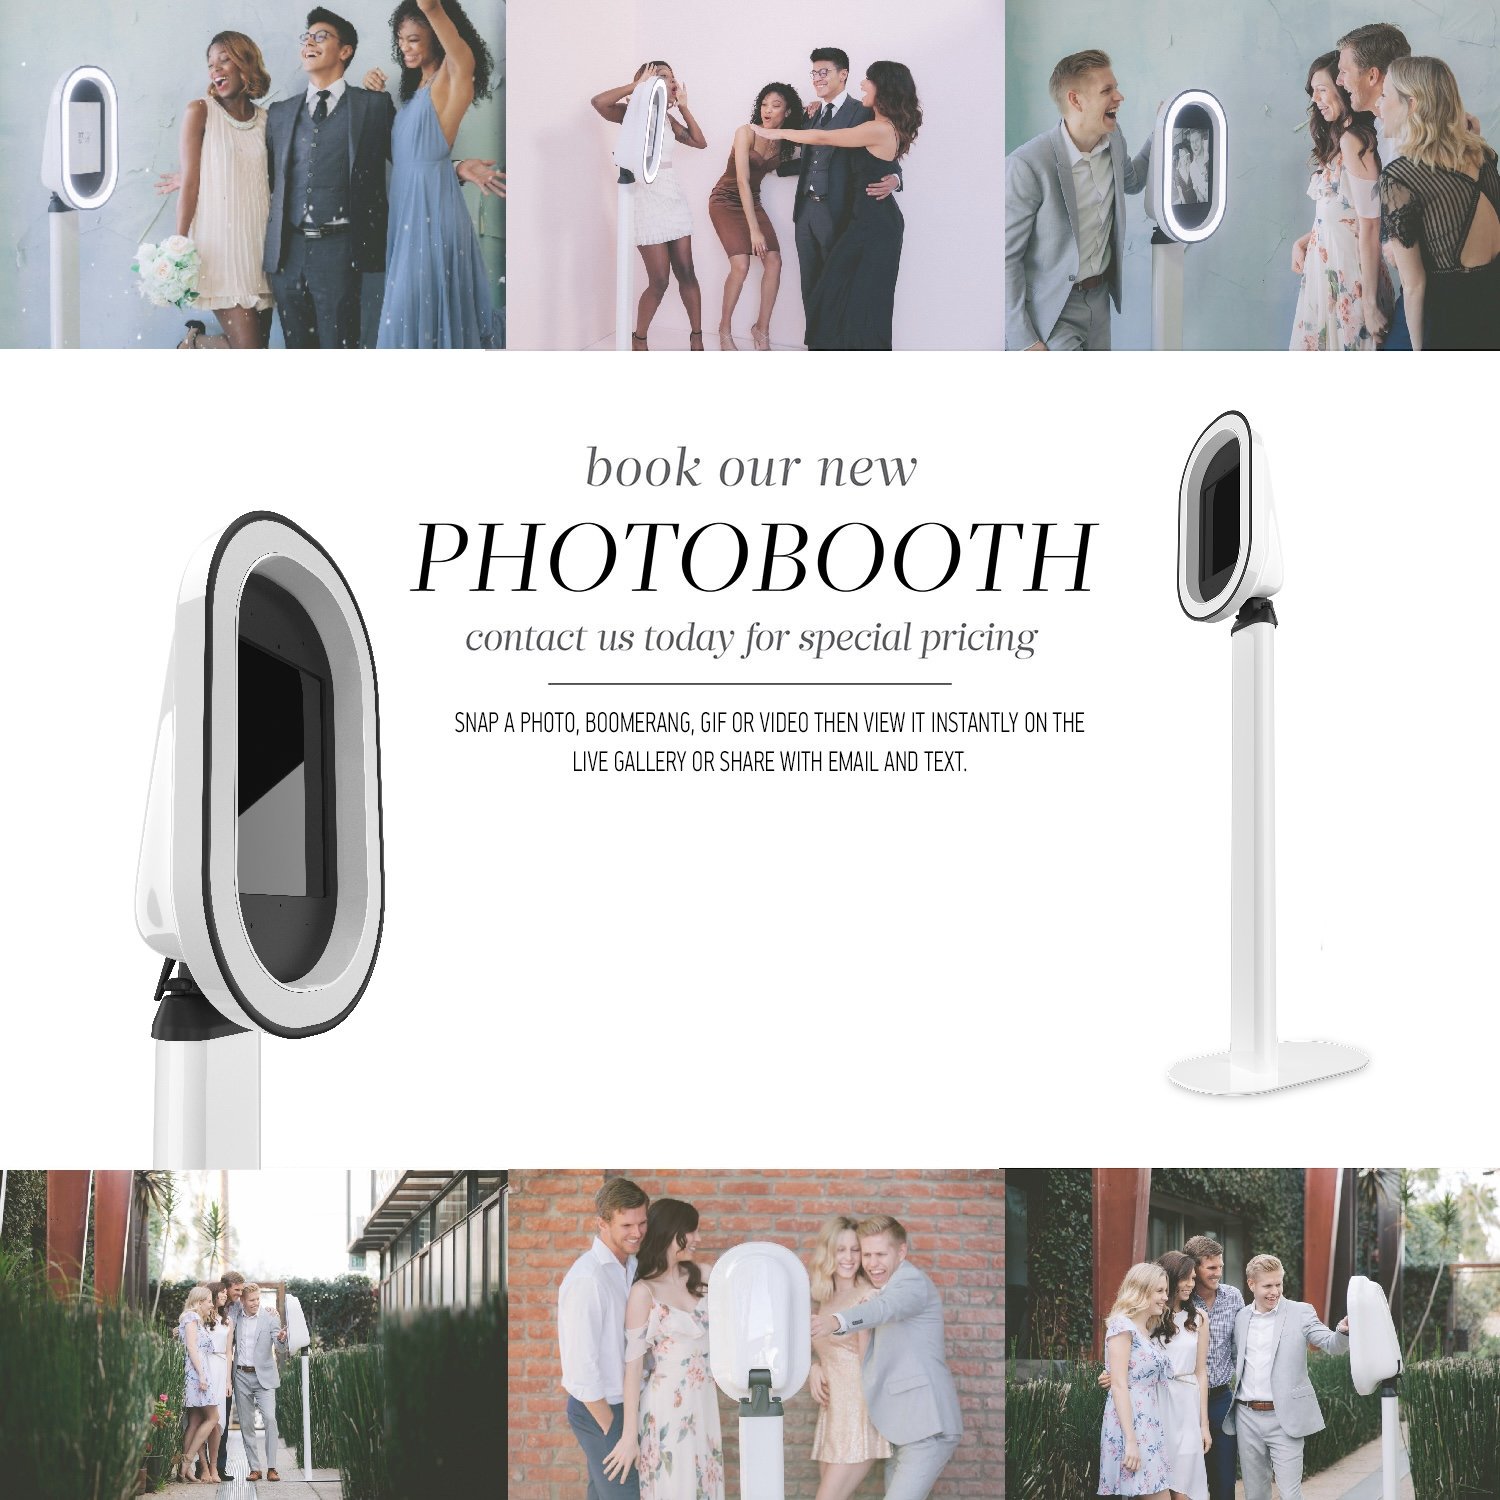 Photo booth advertisement showing how people can use the camera